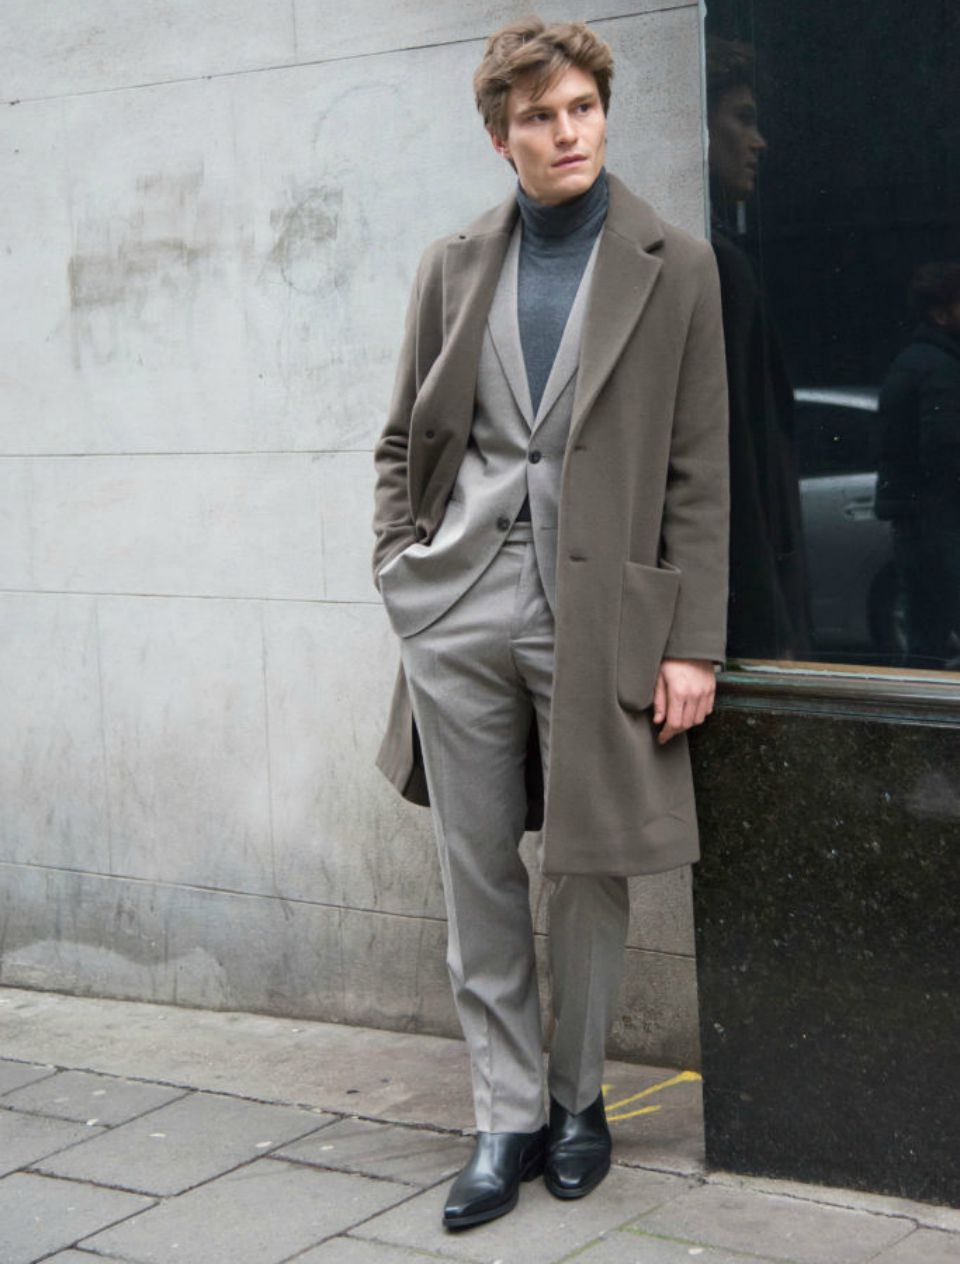 Model Oliver Cheshire layers up luxury fabrics for winter